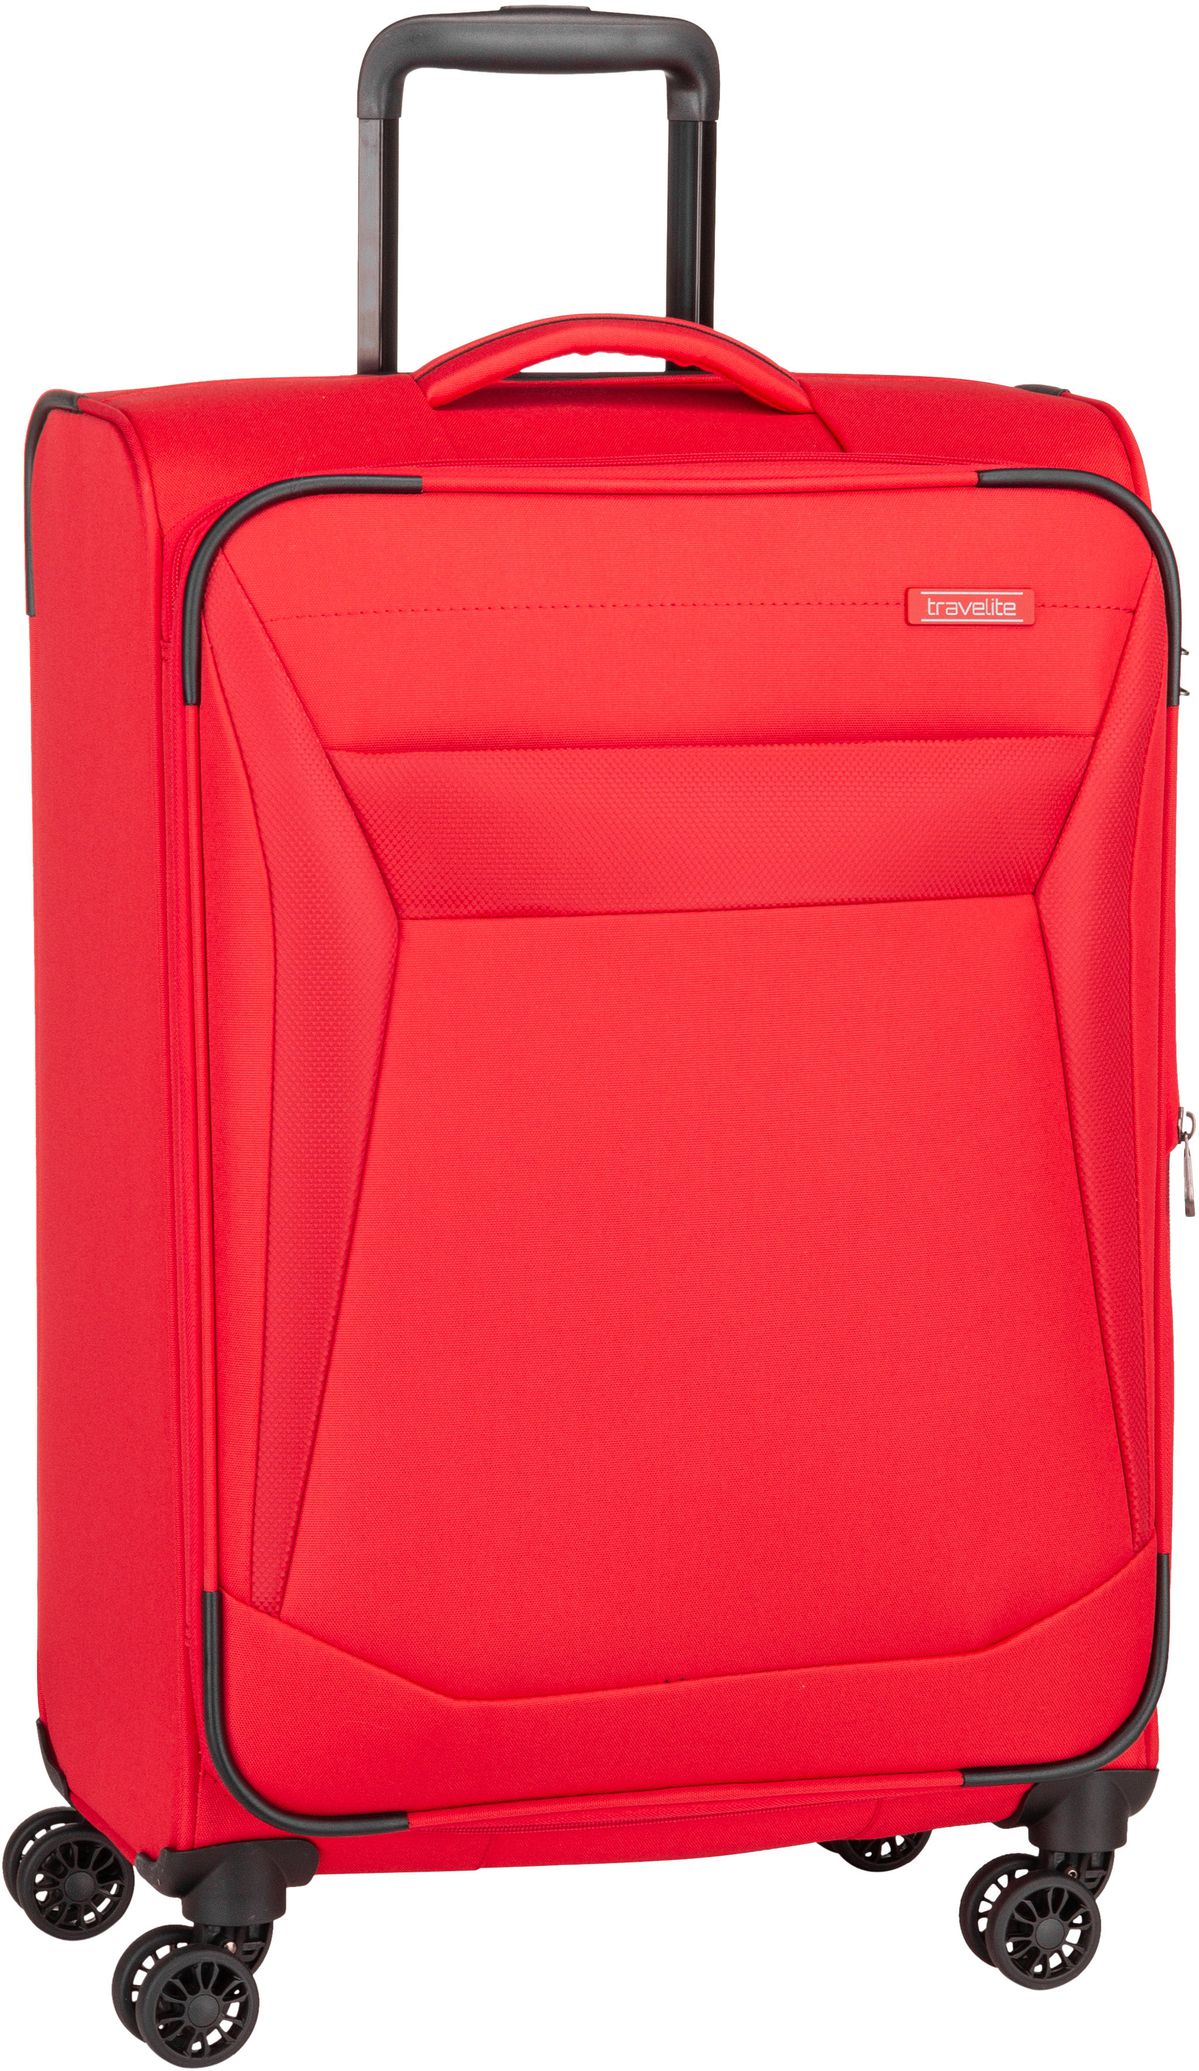 travelite Chios 4w Trolley M  in Rot (60 Liter), Koffer & Trolley